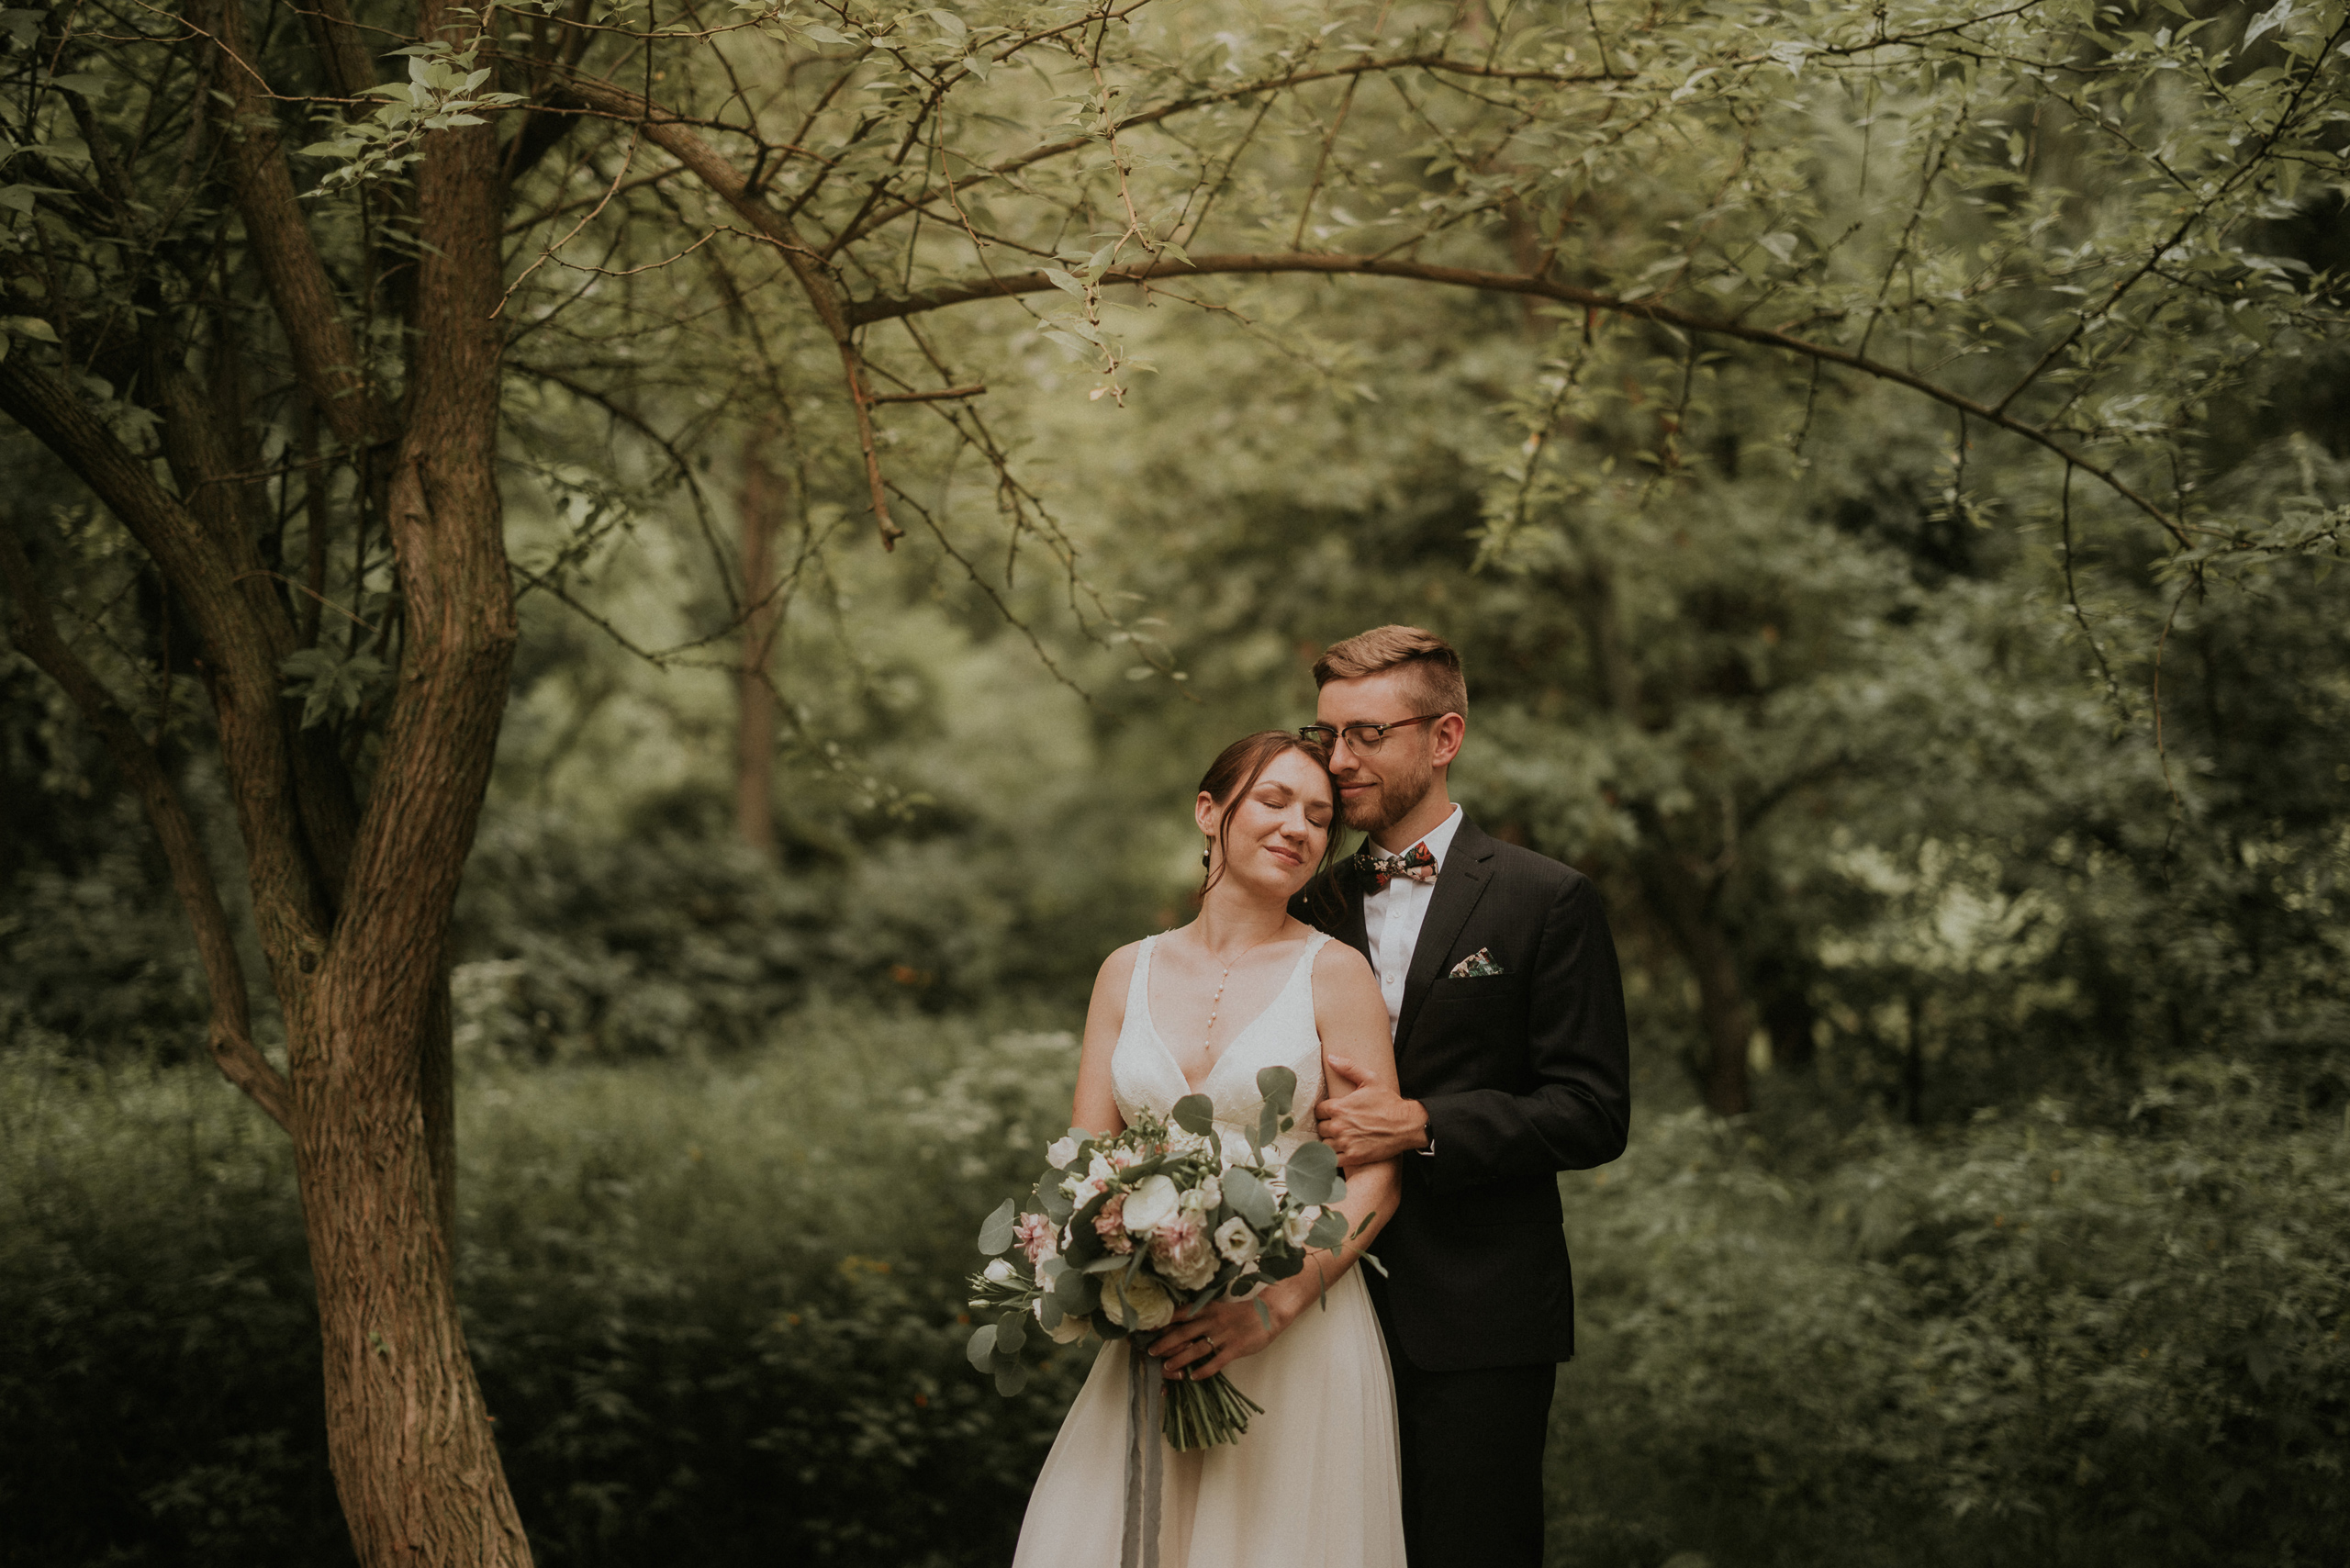 bride groom wedding photographer afterglow vineland nature fores